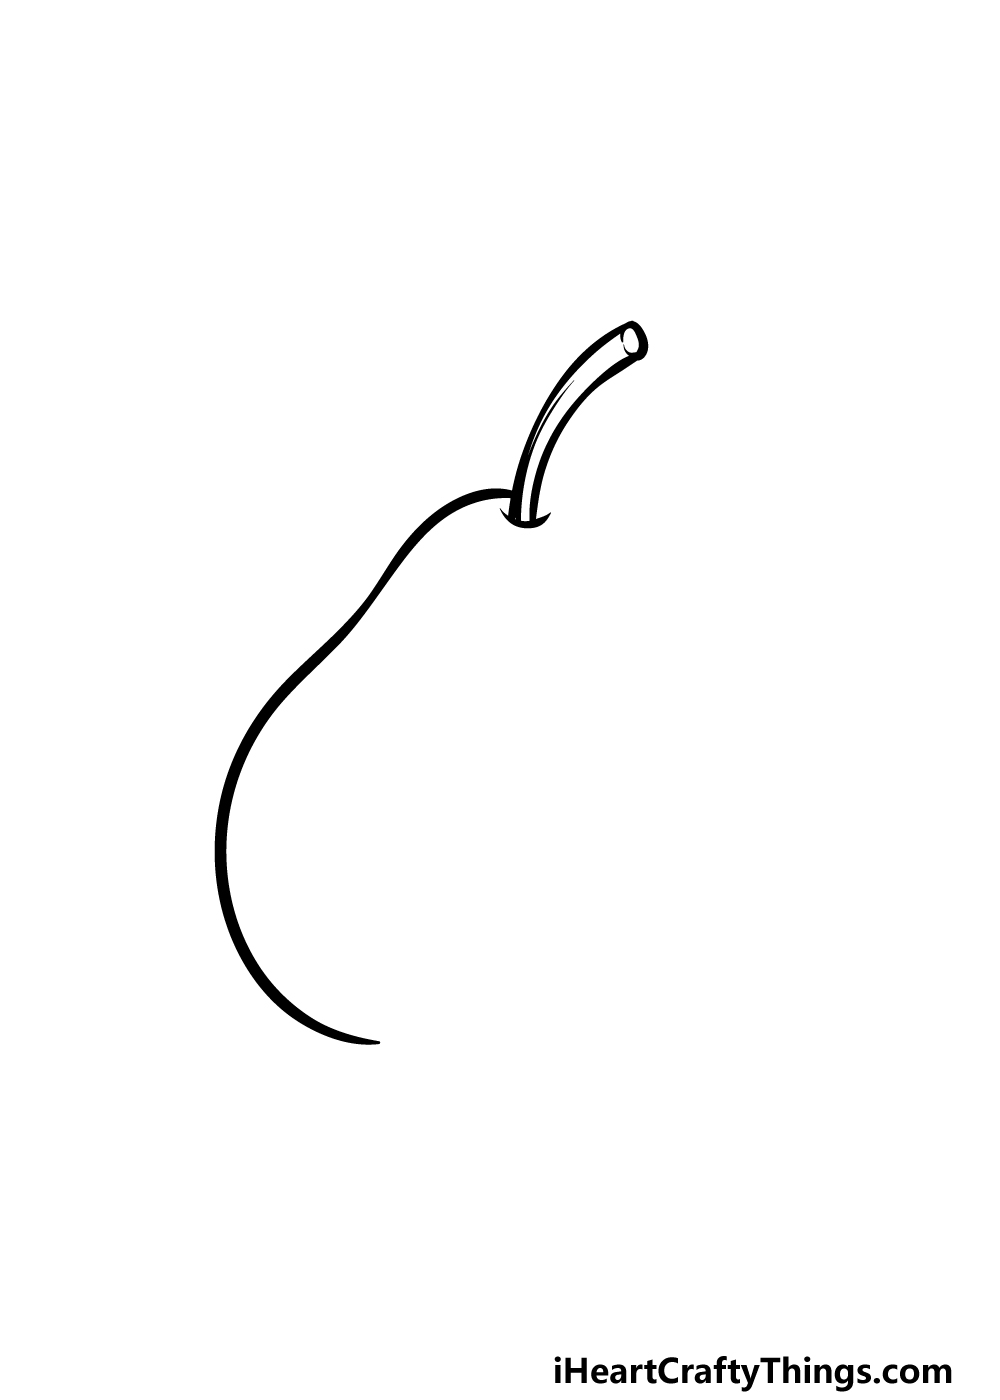 How to Draw A Pear step 1